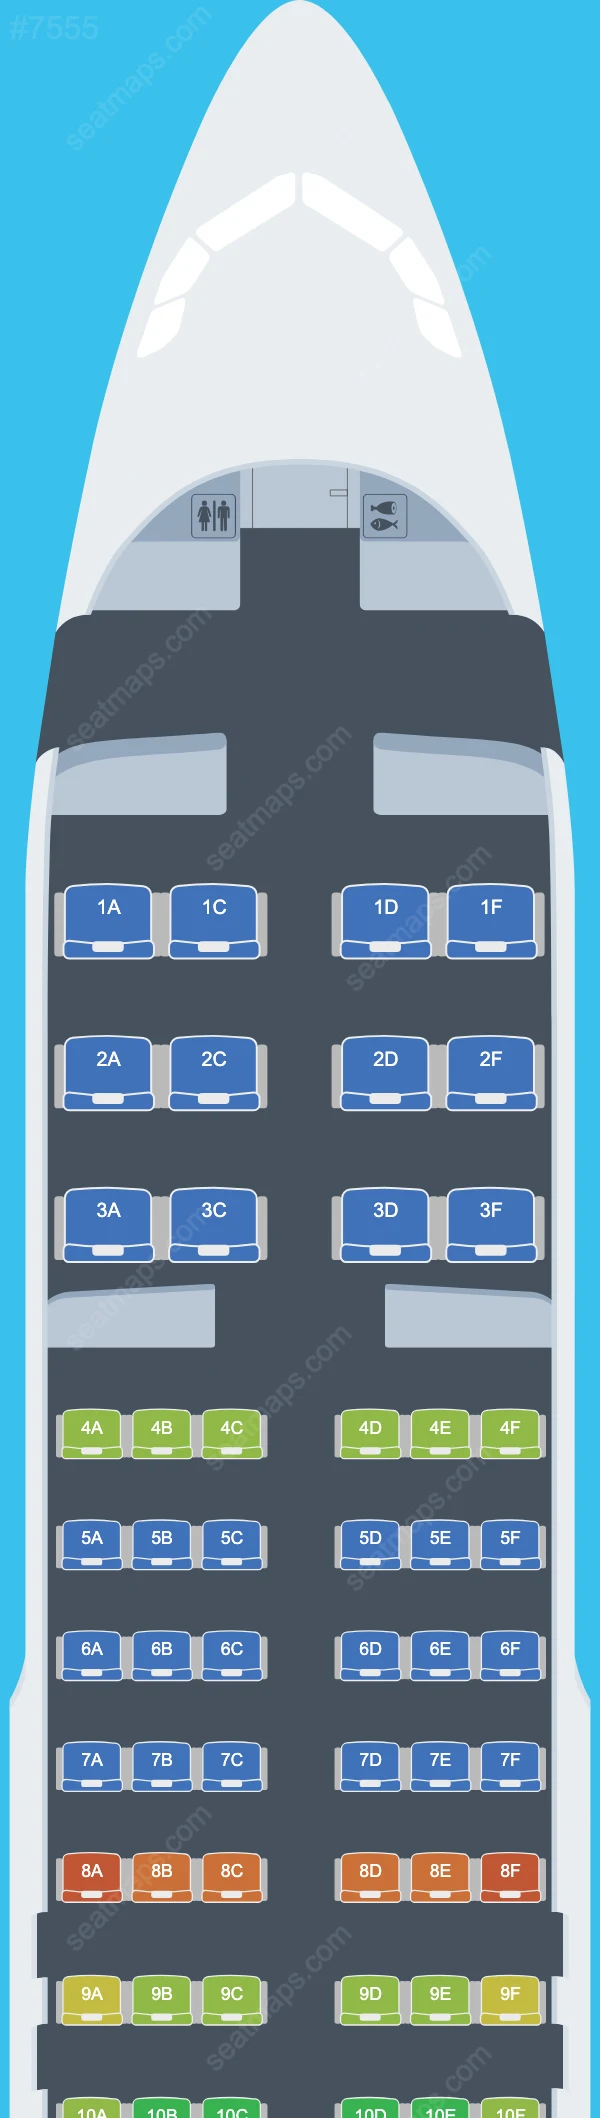 Solomon Airlines Airbus A320 Seat Maps A320-200